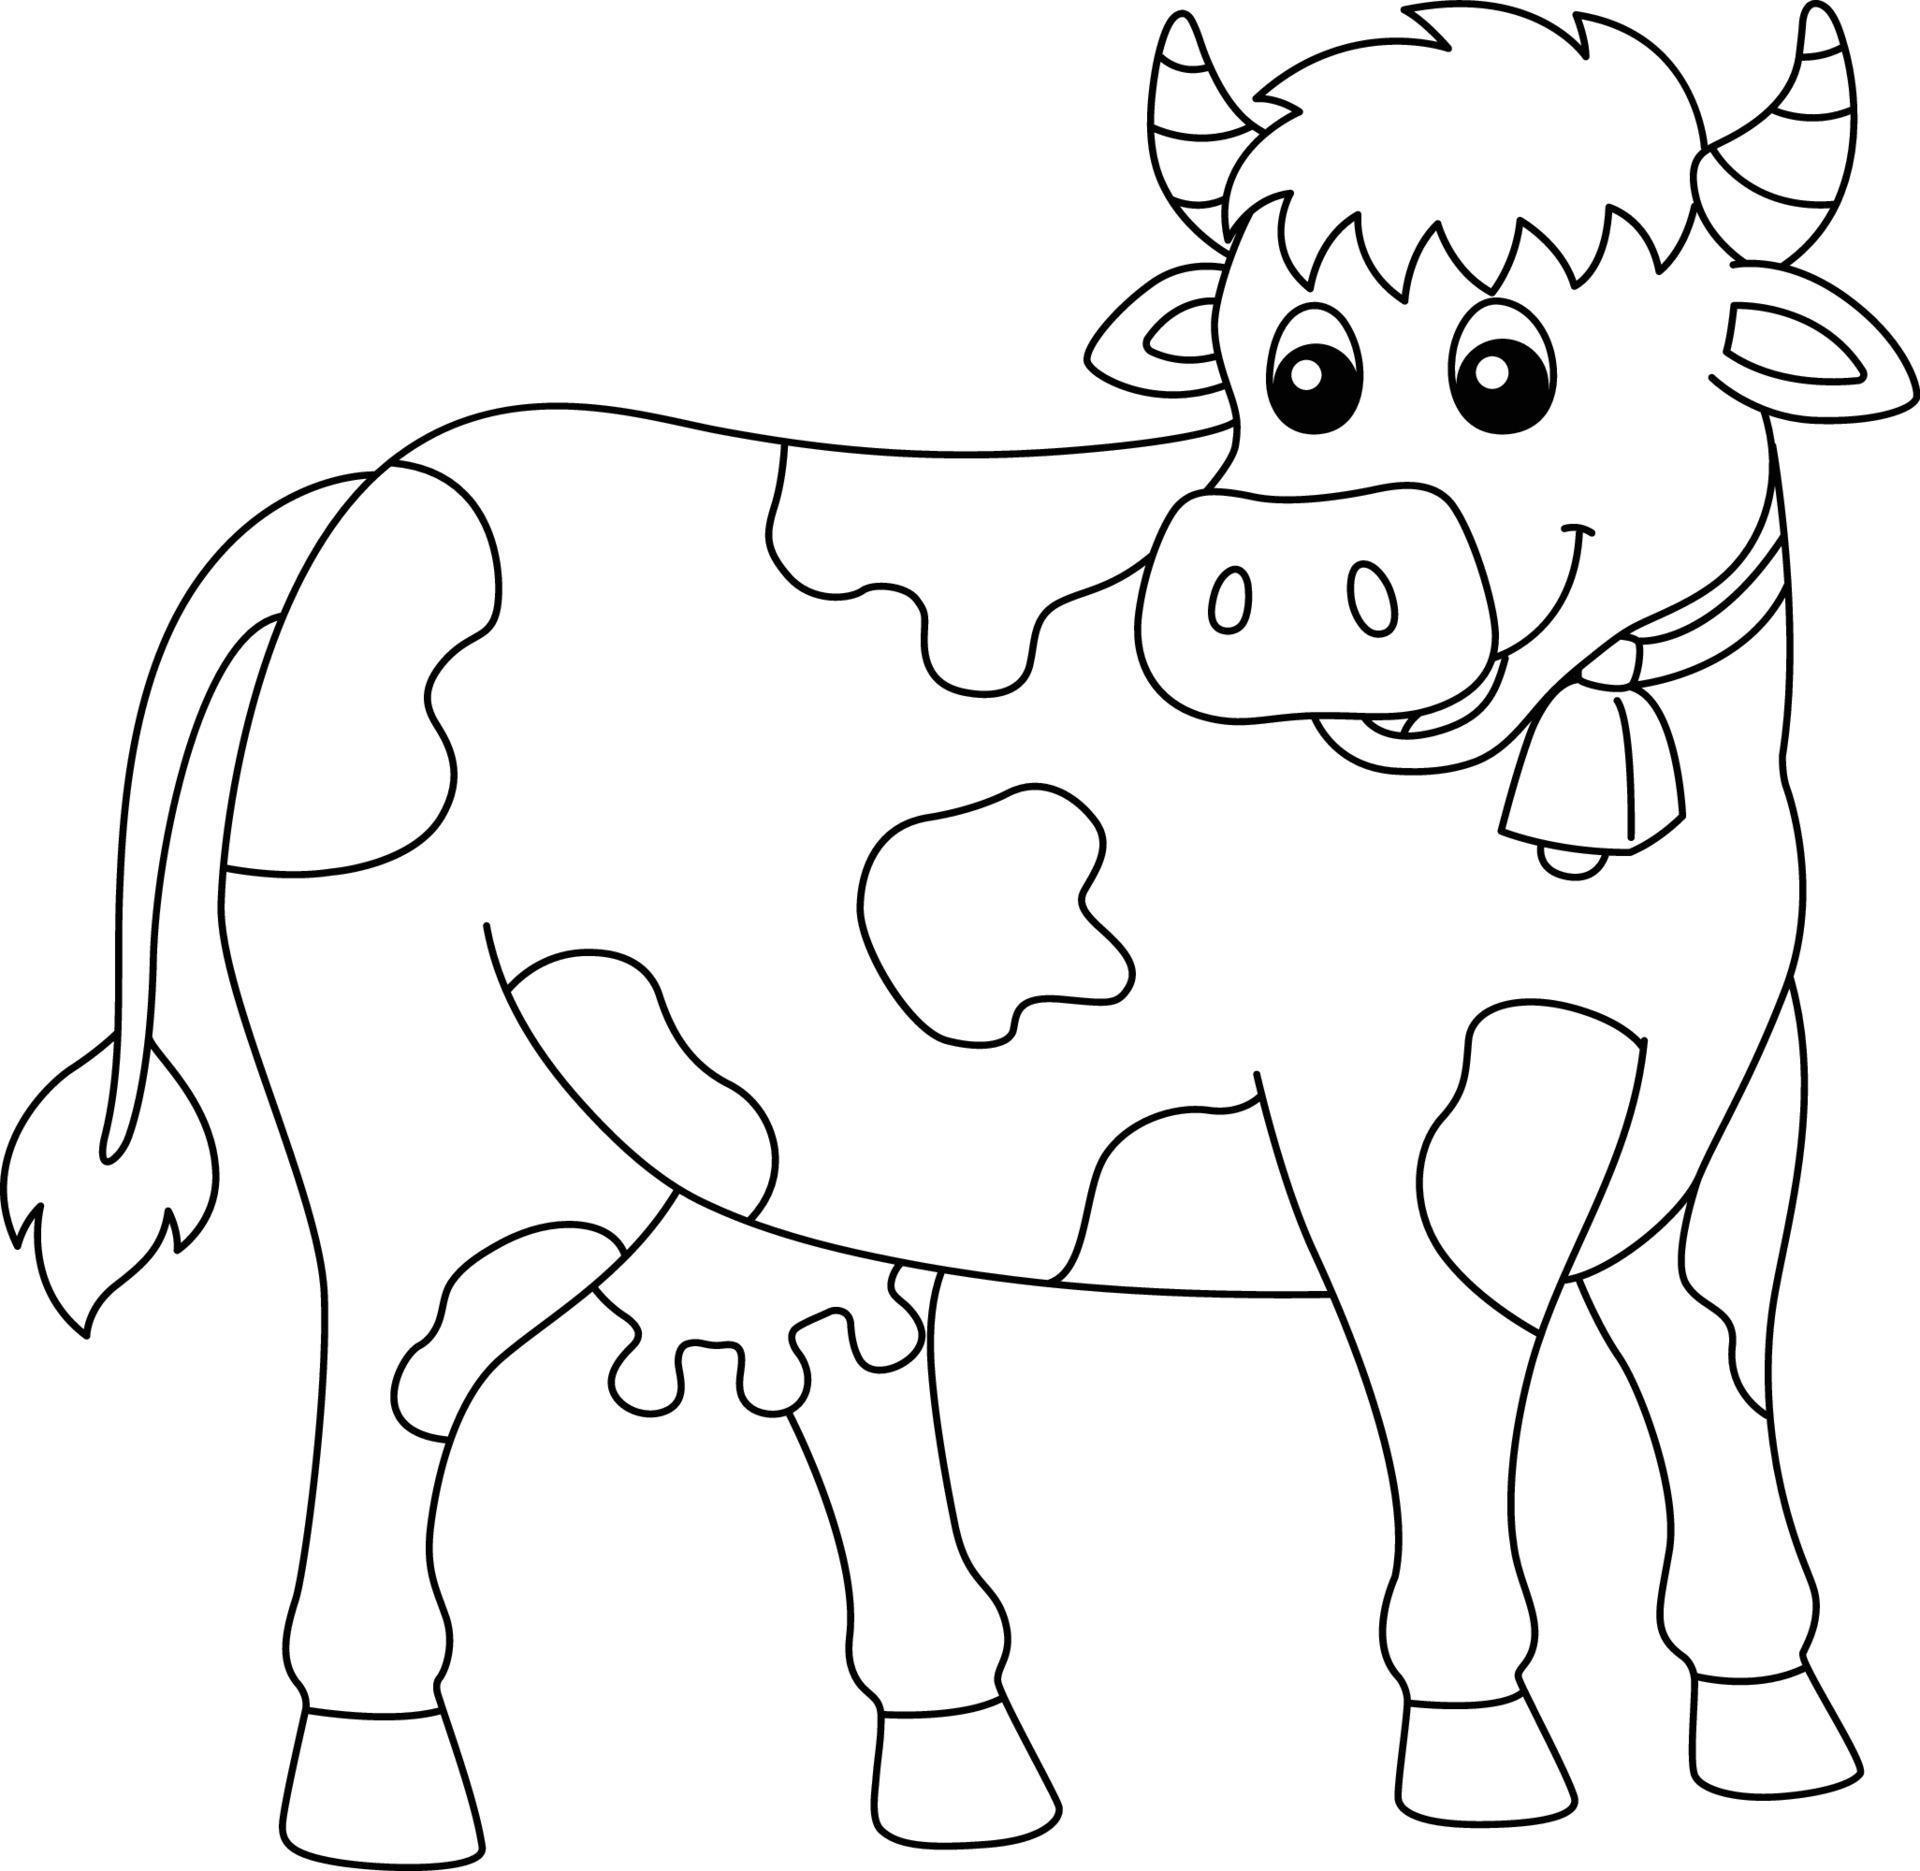 Loving cow coloring book for toddlers 2 3 years old